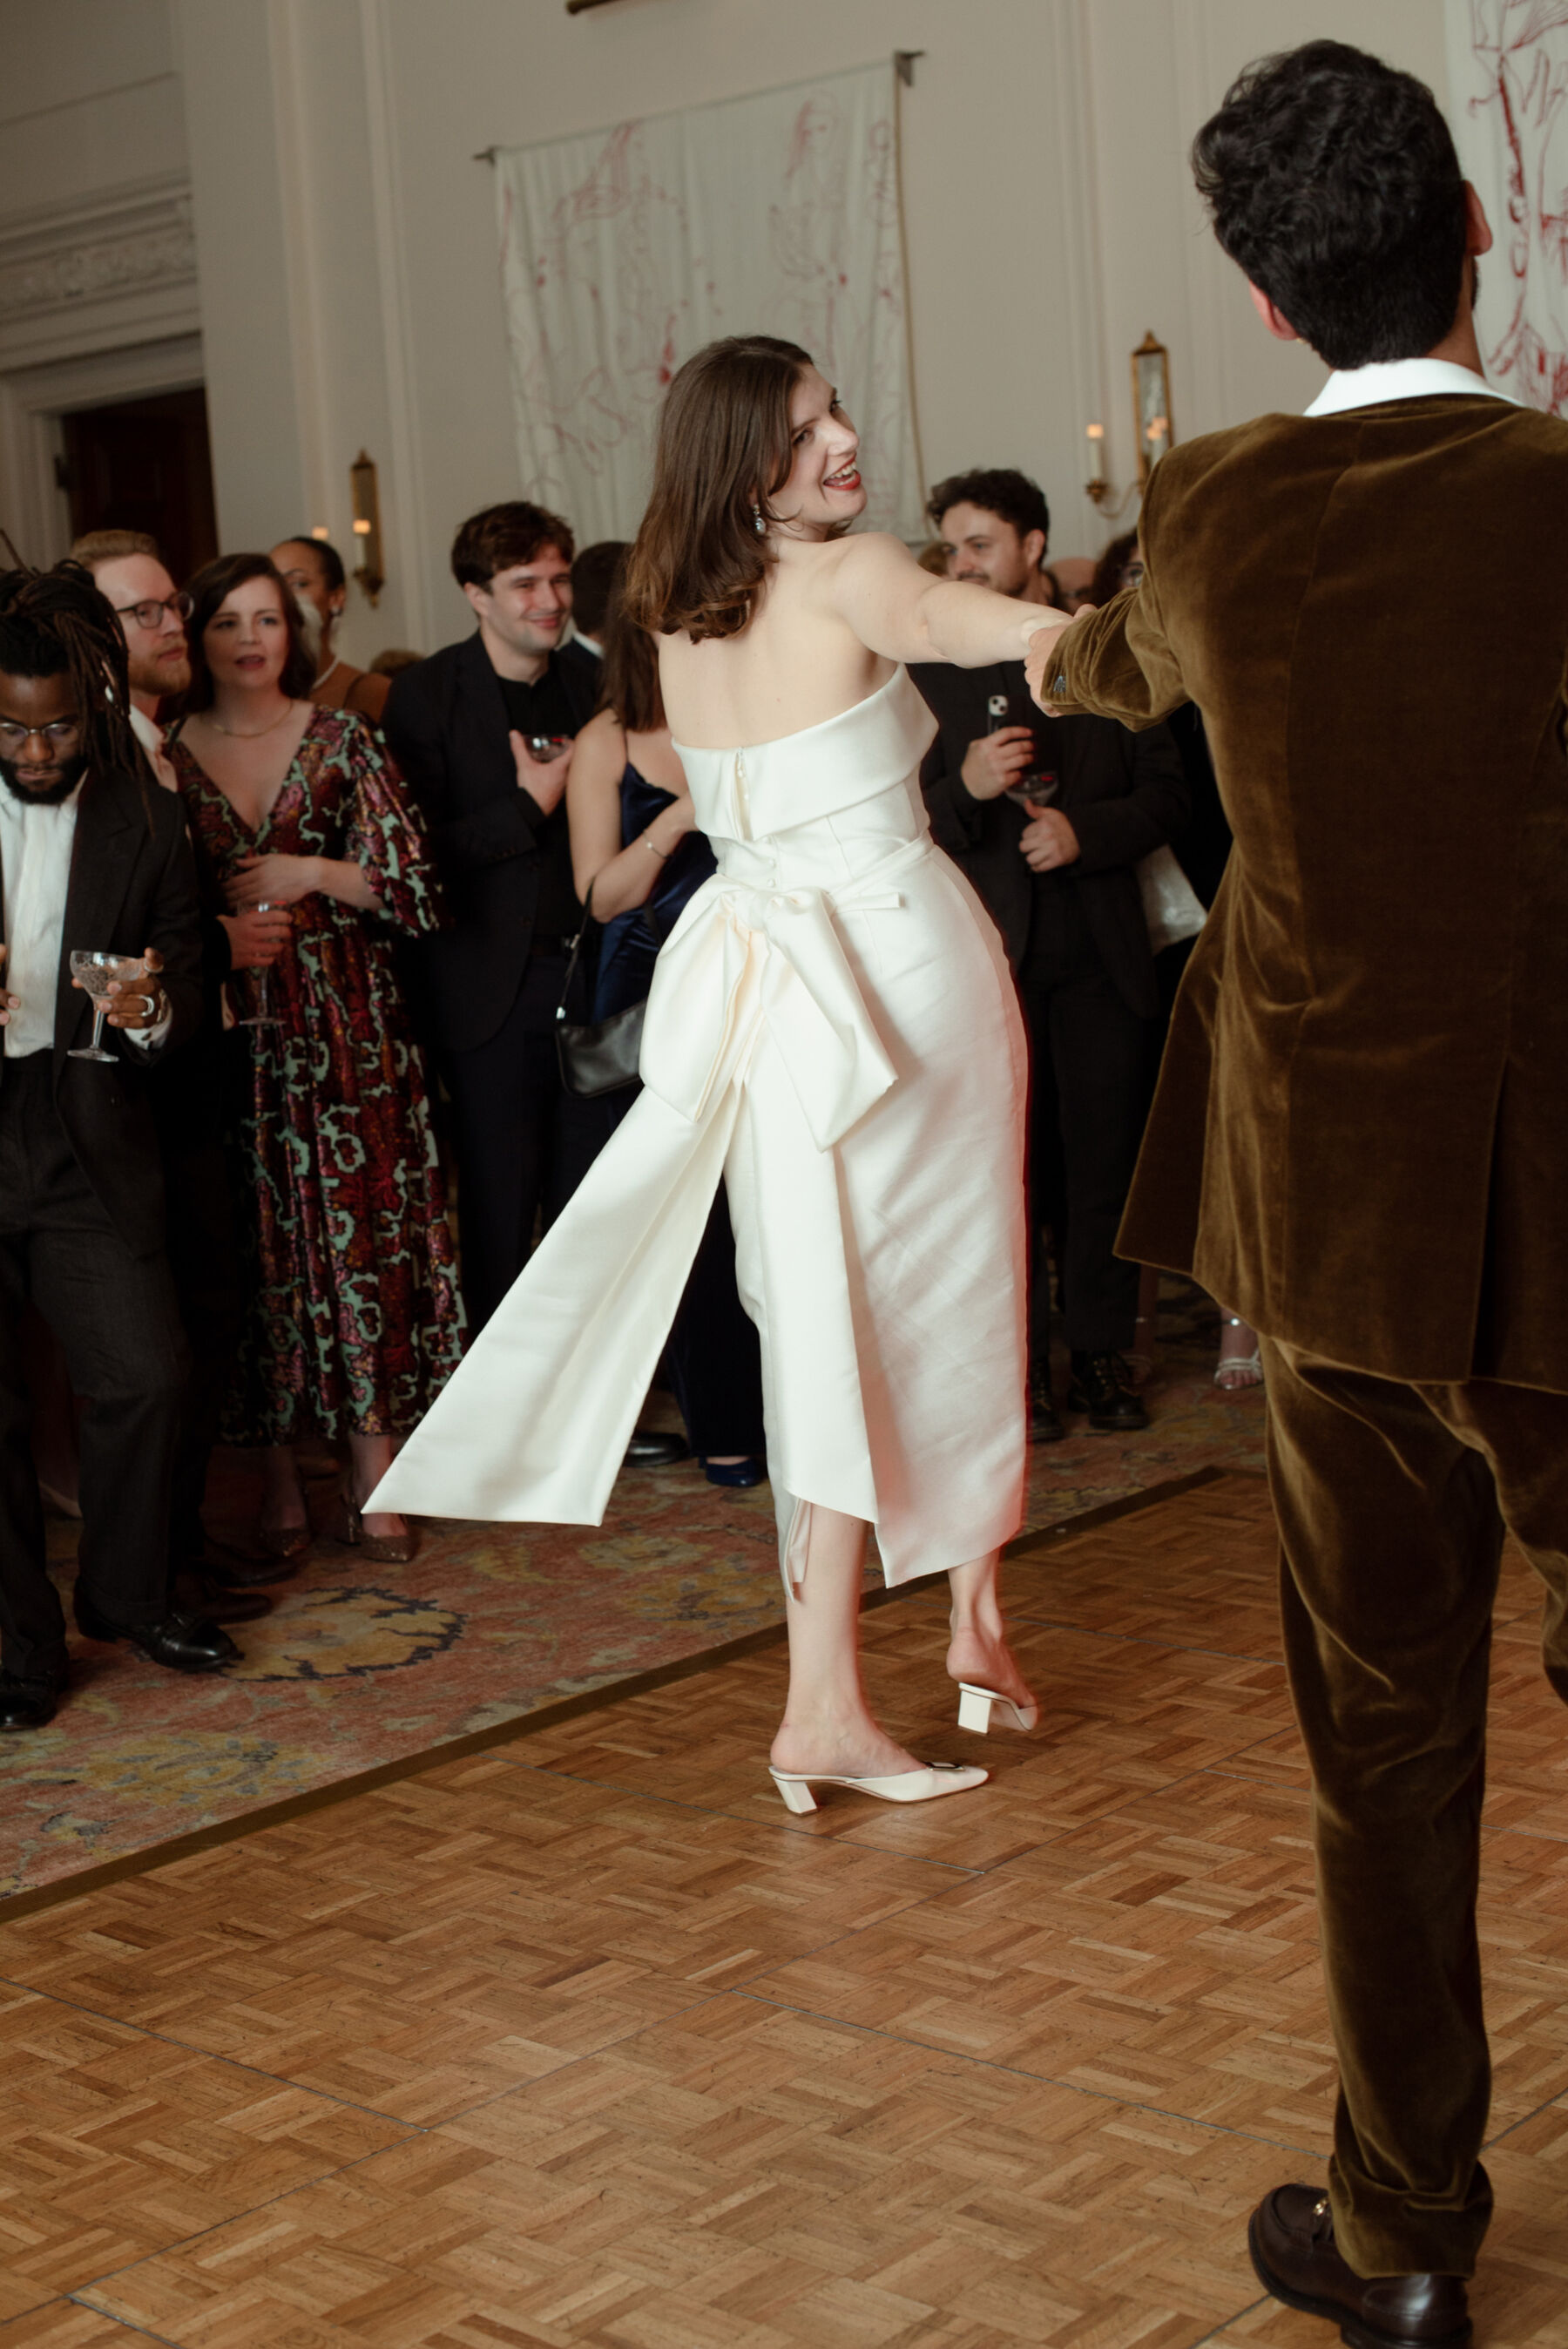 Bride dancing in a Jessica Bennett dress with bustle bow.